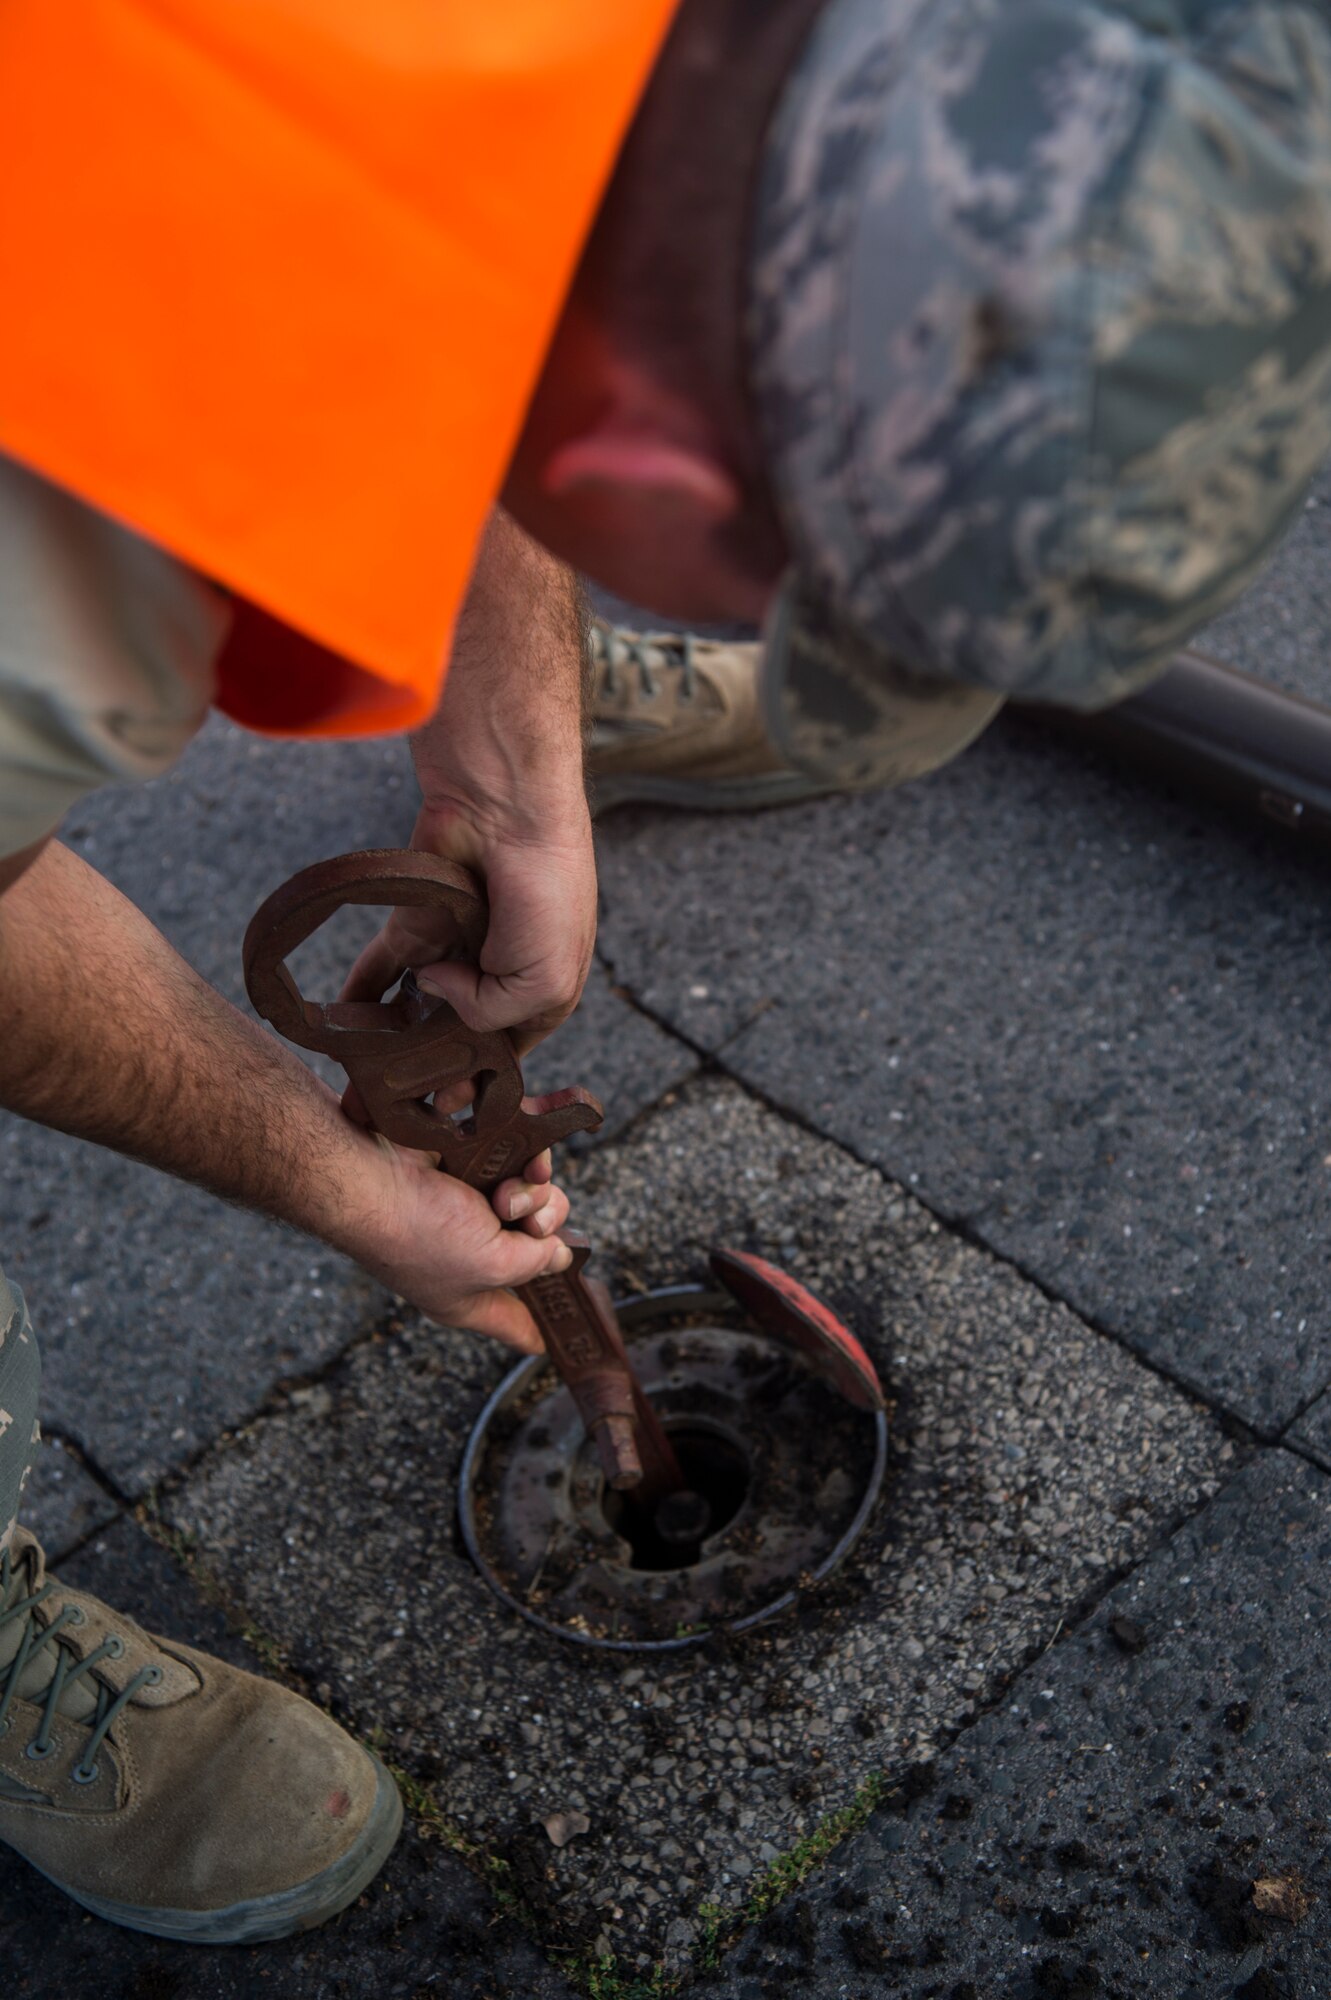 U.S. Staff Sgt. Adam Recob, 52nd Civil Engineer Squadron Pavement and Construction equipment operator, prepares to place a roadway barrier pole at Spangdahlem Air Base, Germany, Sept. 10, 2018, during a base-wide readiness exercise. The week-long exercise required Airmen to respond quickly to simulated threats in preparation for potential real-life events. (U.S. Air Force photo by Airman 1st Class Valerie Seelye)